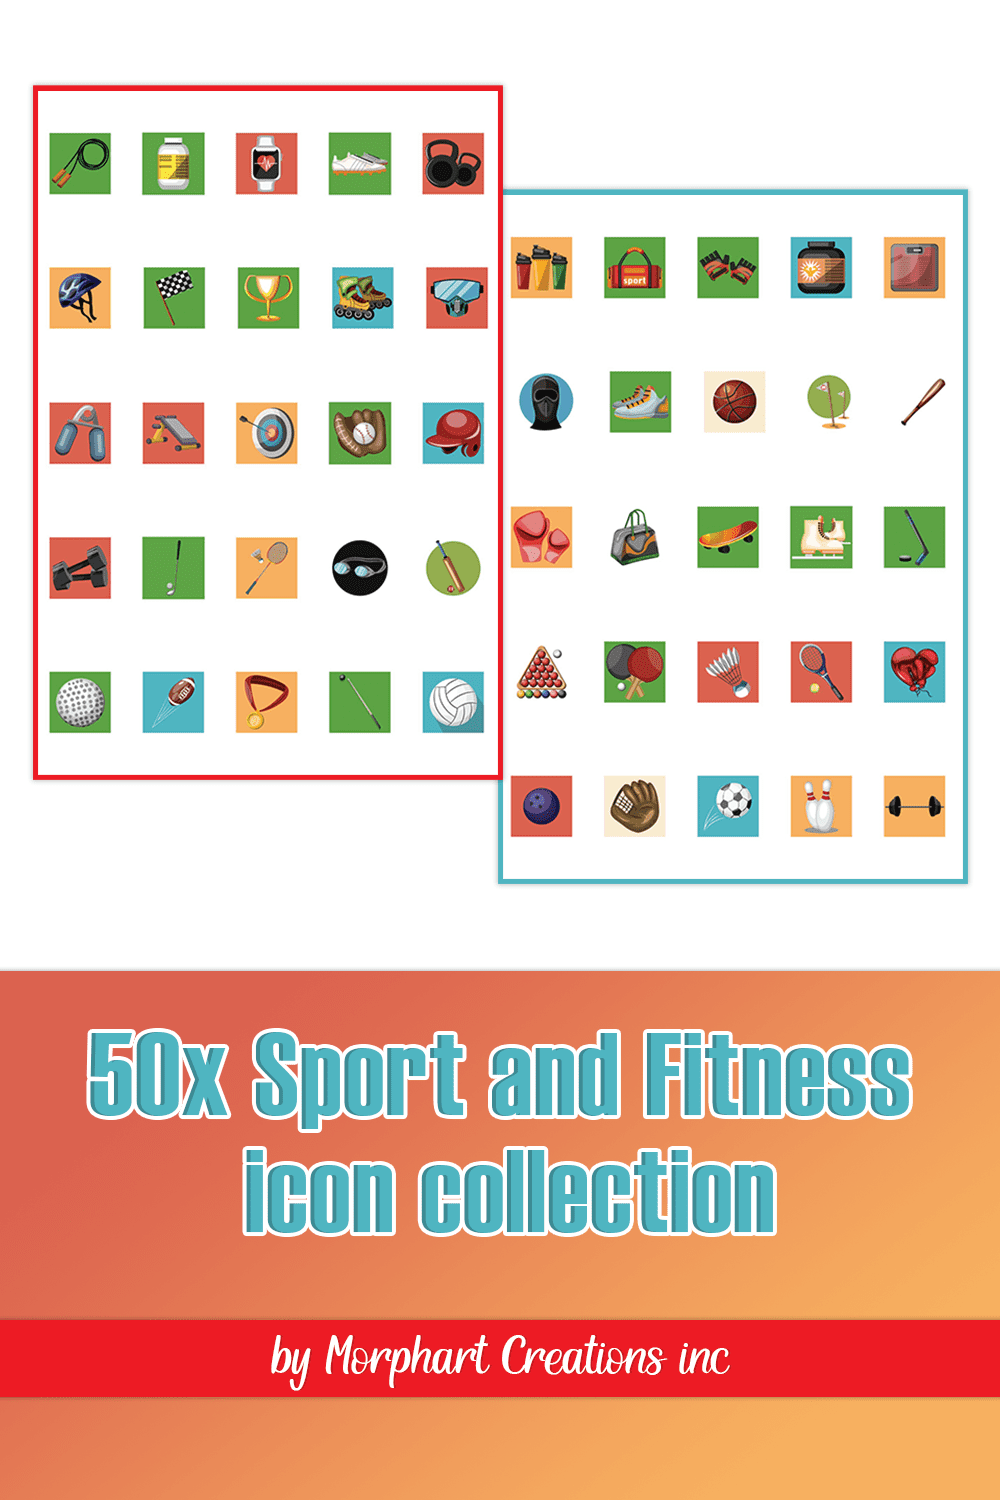 A selection of cartoon images of items for sports and fitness.